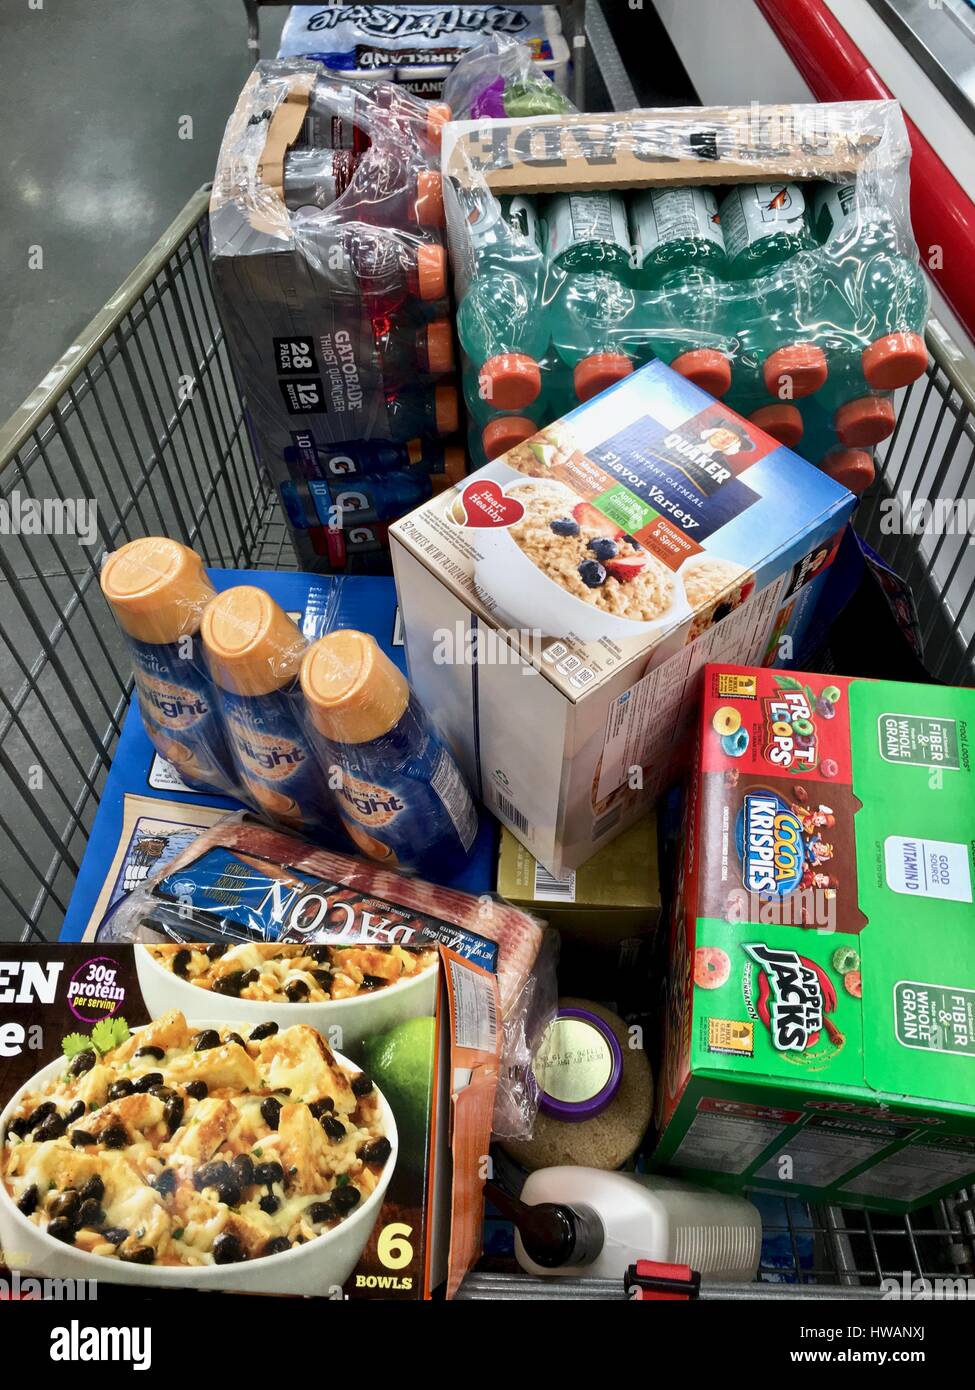 Grocery cart filled with groceries at Costco Stock Photo